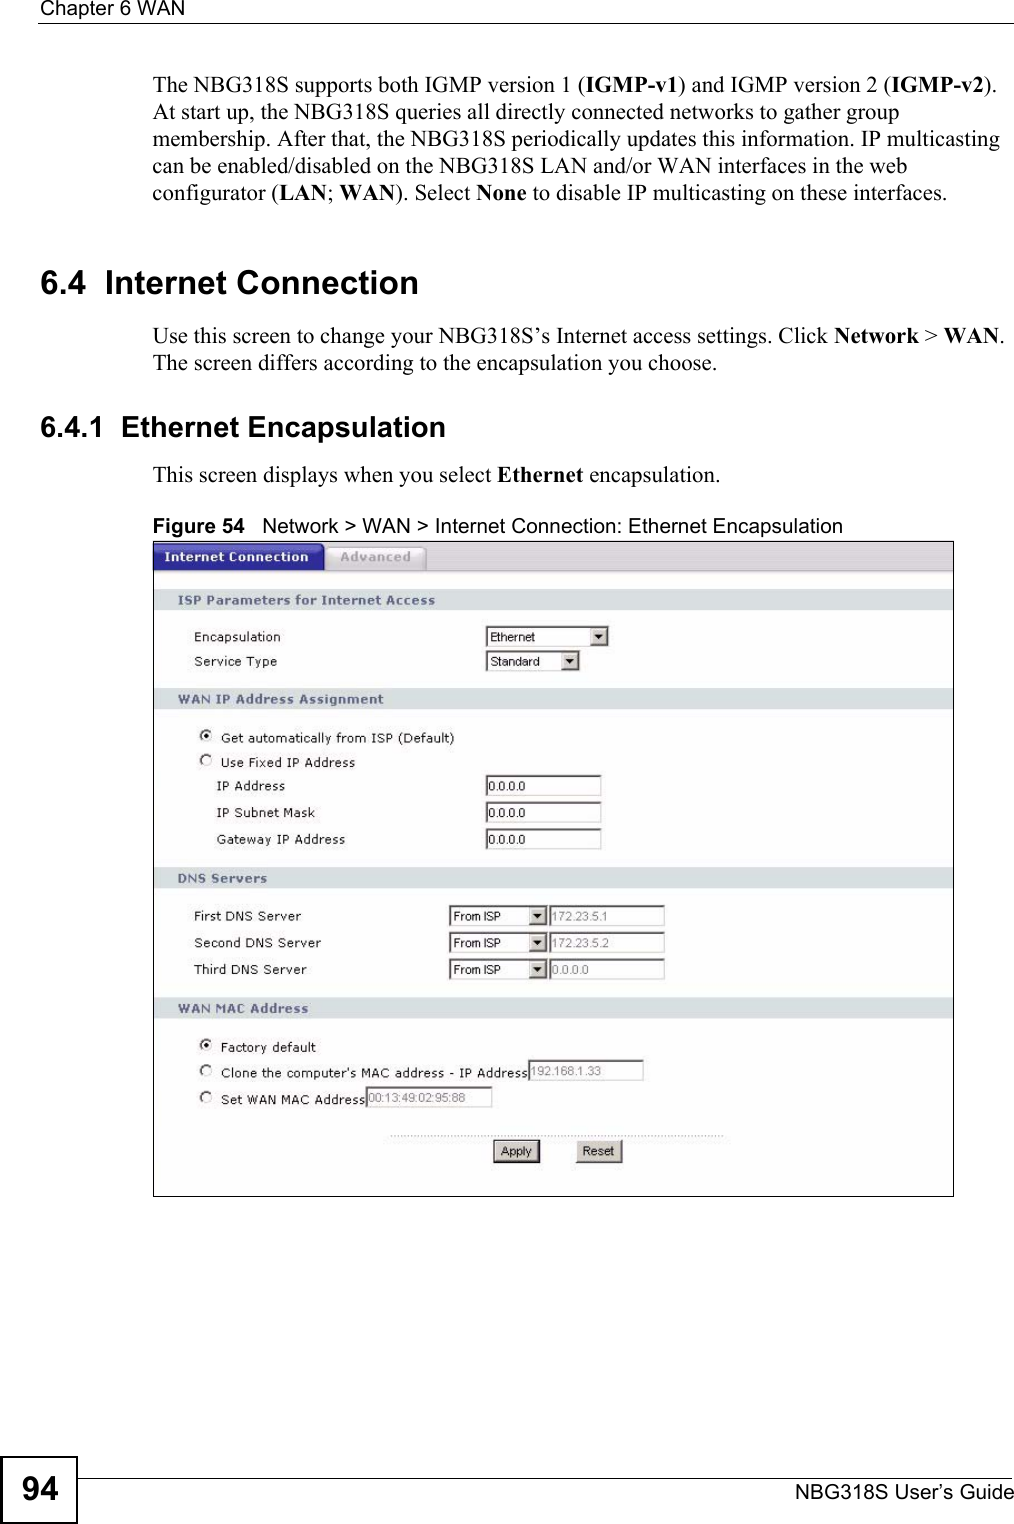 Chapter 6 WANNBG318S User’s Guide94The NBG318S supports both IGMP version 1 (IGMP-v1) and IGMP version 2 (IGMP-v2). At start up, the NBG318S queries all directly connected networks to gather group membership. After that, the NBG318S periodically updates this information. IP multicasting can be enabled/disabled on the NBG318S LAN and/or WAN interfaces in the web configurator (LAN; WAN). Select None to disable IP multicasting on these interfaces.6.4  Internet ConnectionUse this screen to change your NBG318S’s Internet access settings. Click Network &gt; WAN. The screen differs according to the encapsulation you choose.6.4.1  Ethernet EncapsulationThis screen displays when you select Ethernet encapsulation.Figure 54   Network &gt; WAN &gt; Internet Connection: Ethernet Encapsulation